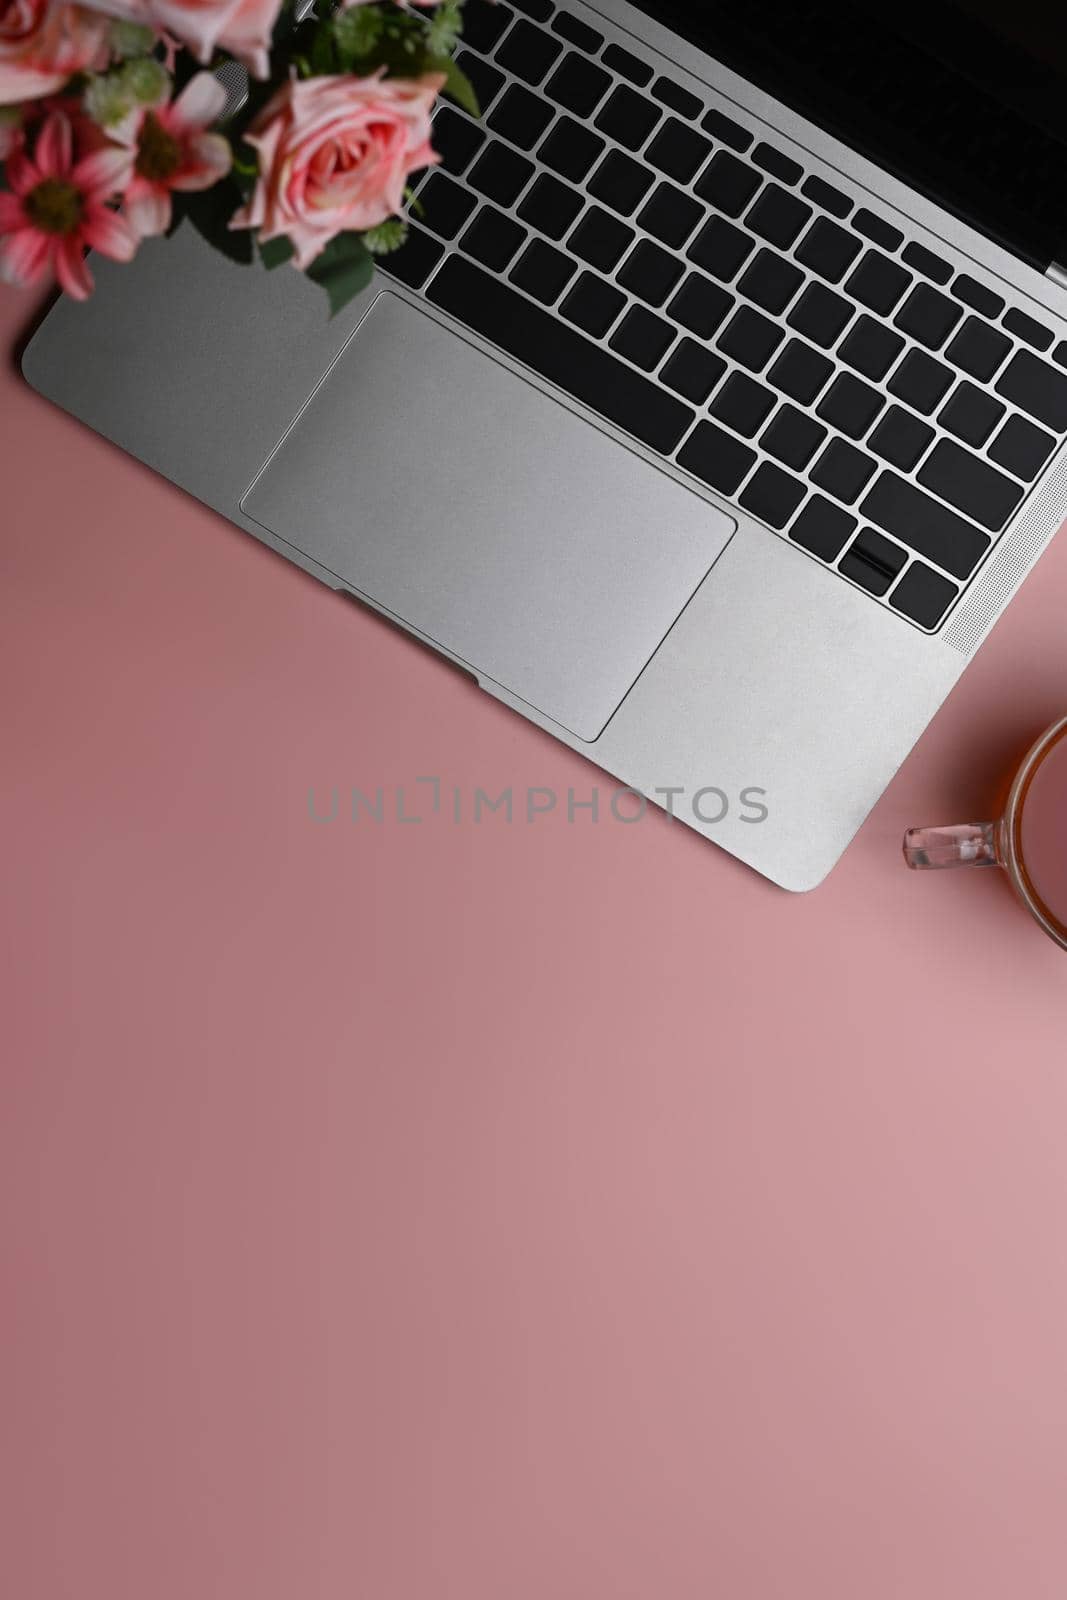 Feminine workspace with laptop, rose flowers and coffee cup on pink background. Flat lay ,Copy space.